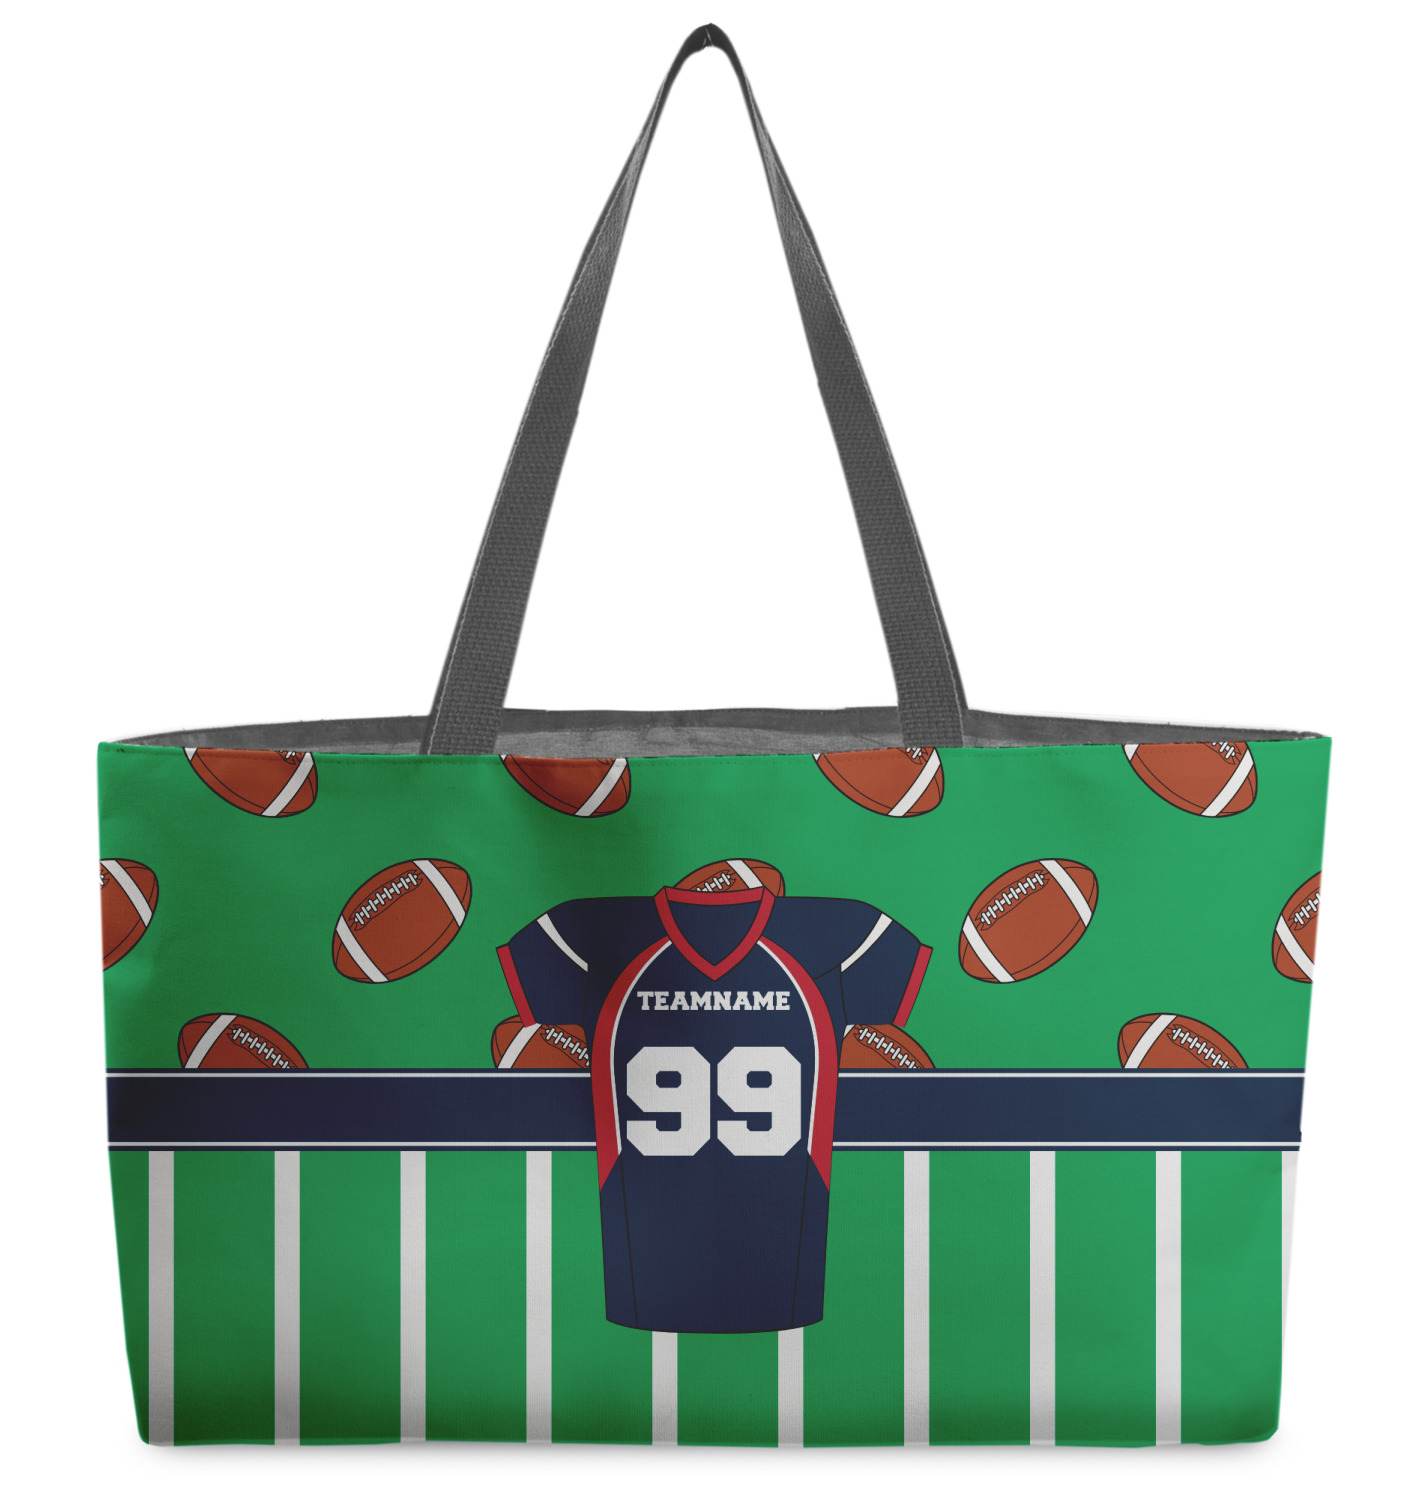 Jersey Tote